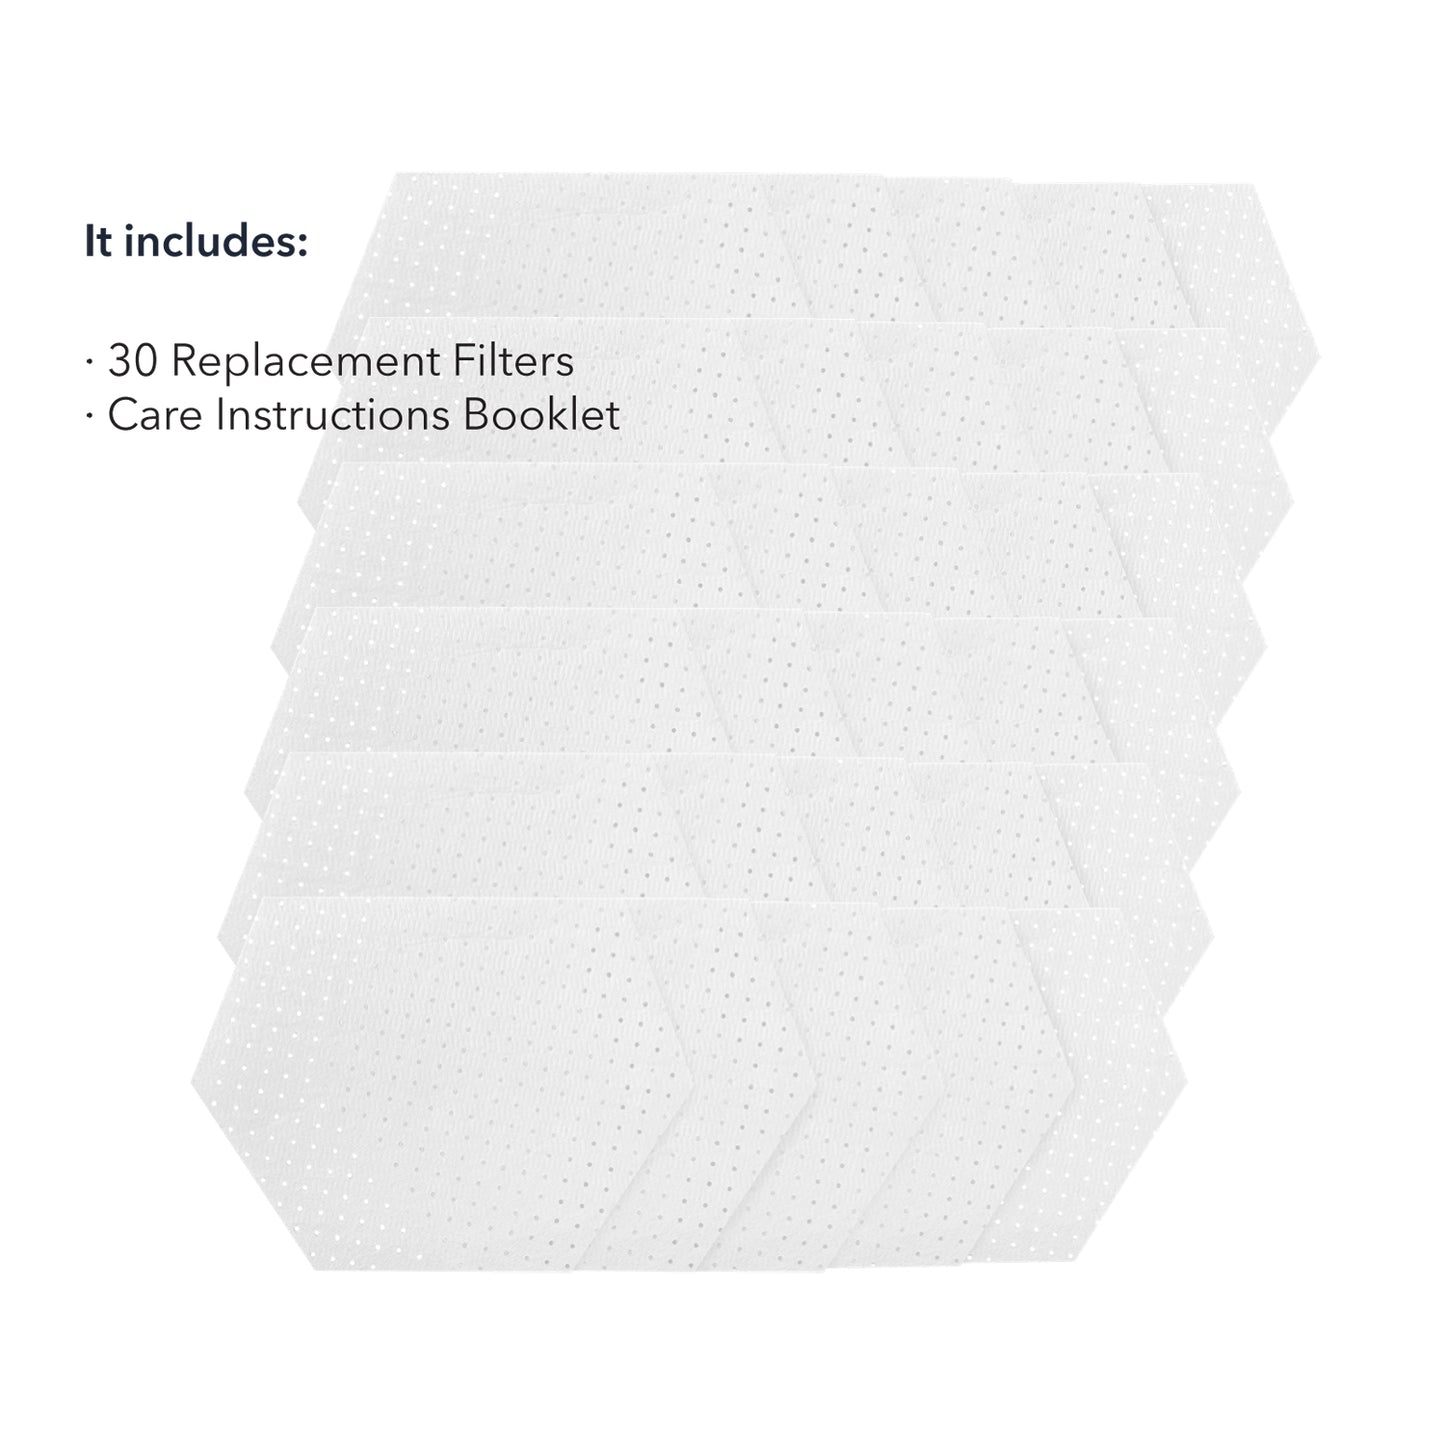 FILTER - REPLACEMENT - FILTER 30 PROFESSIONAL